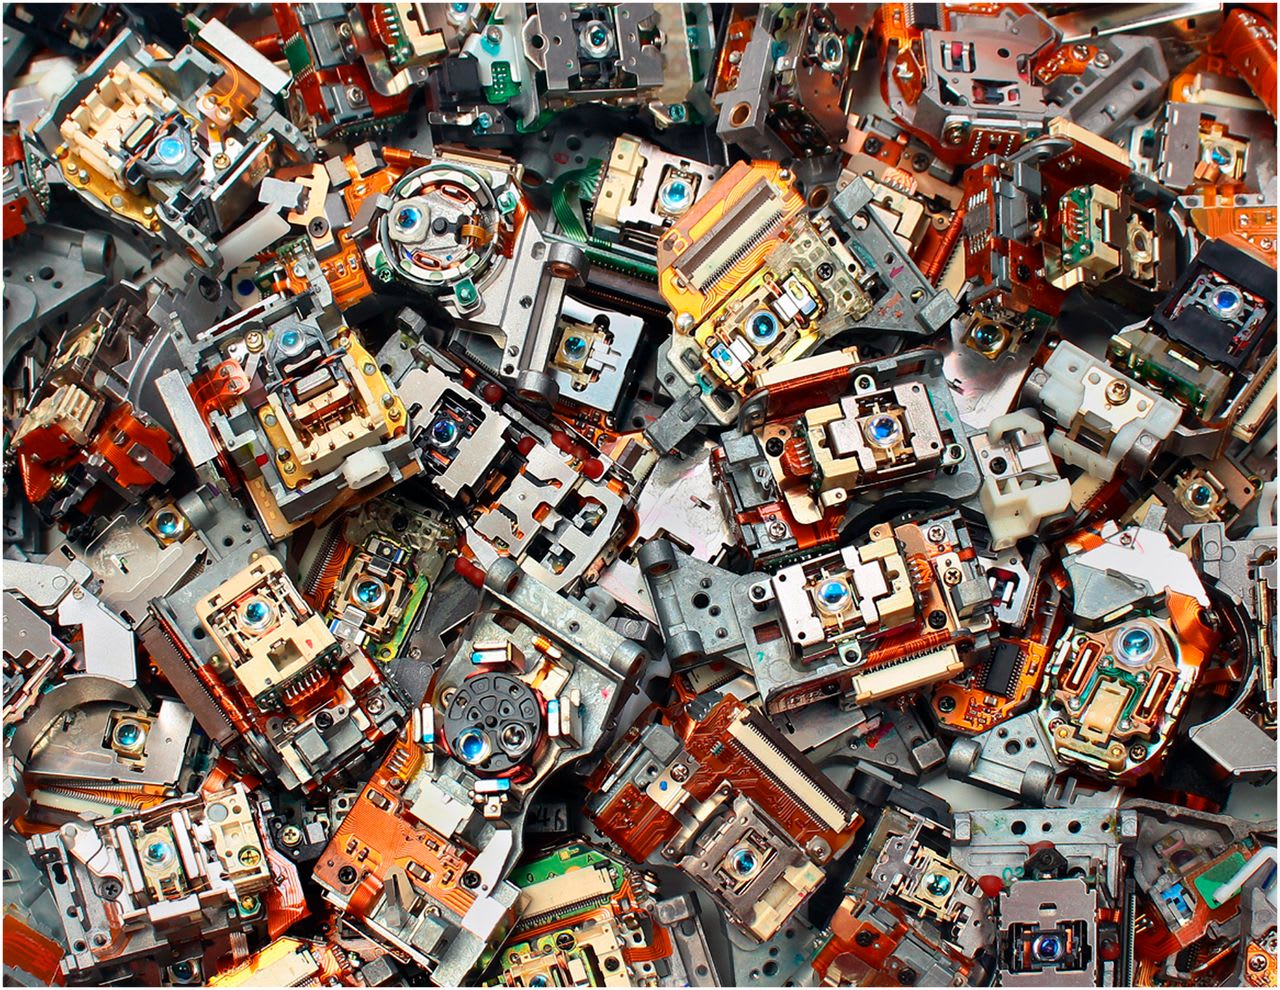 Inner Workings: How bacteria could help recycle electronic waste